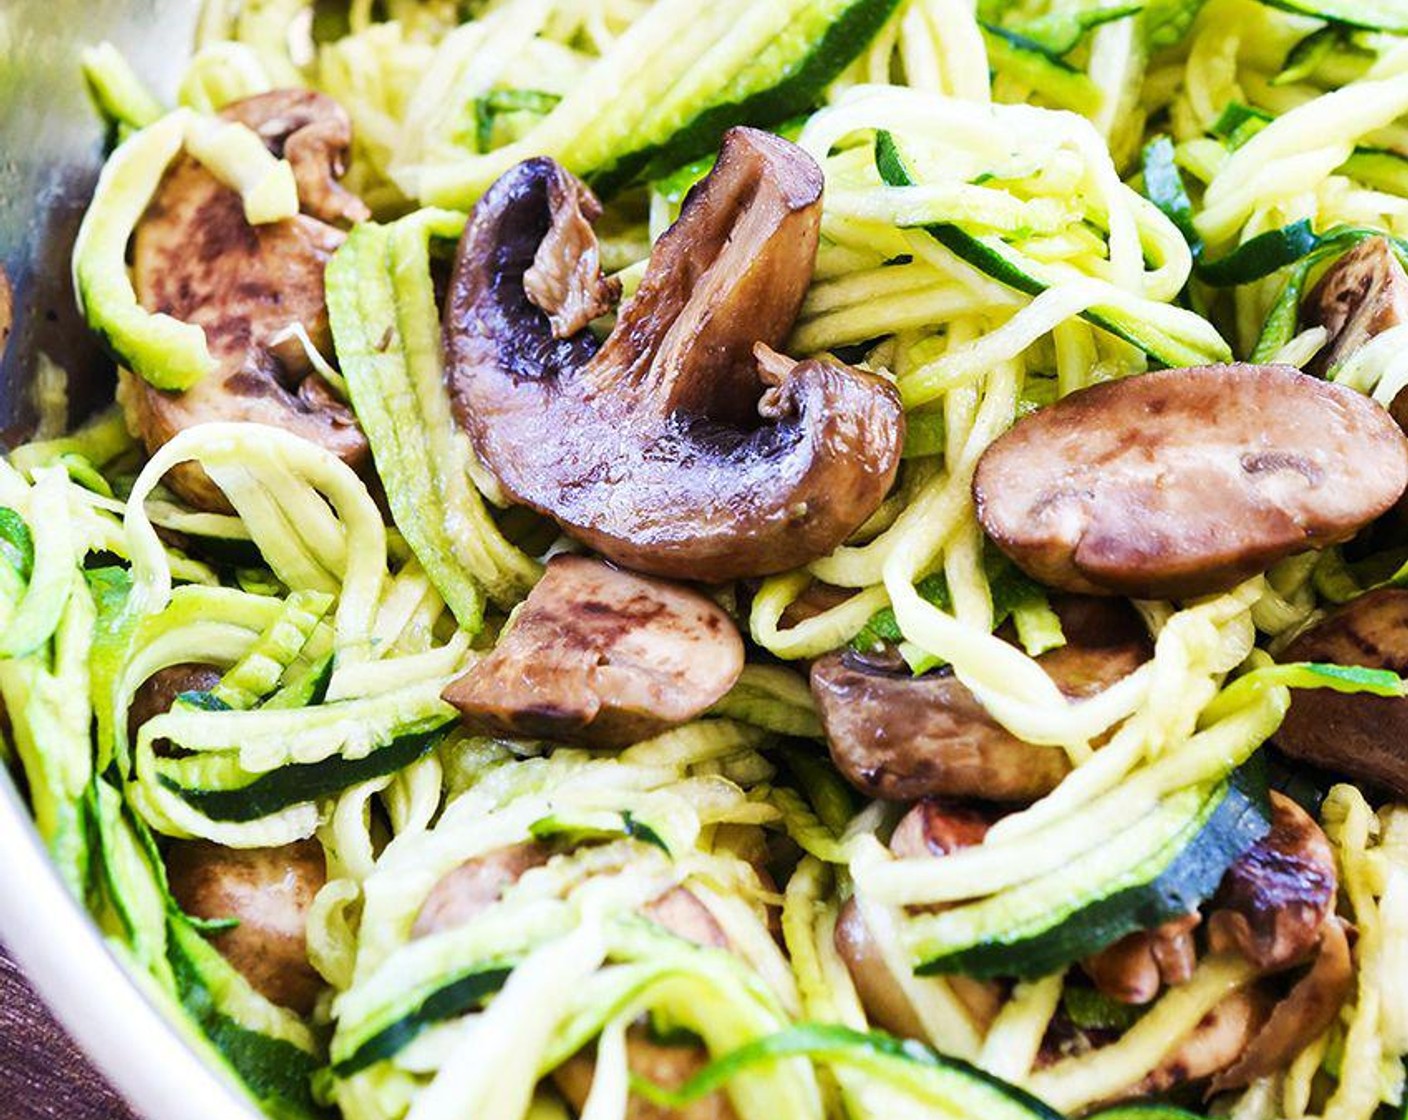 Sauteed Zucchini Noodles and Mushrooms